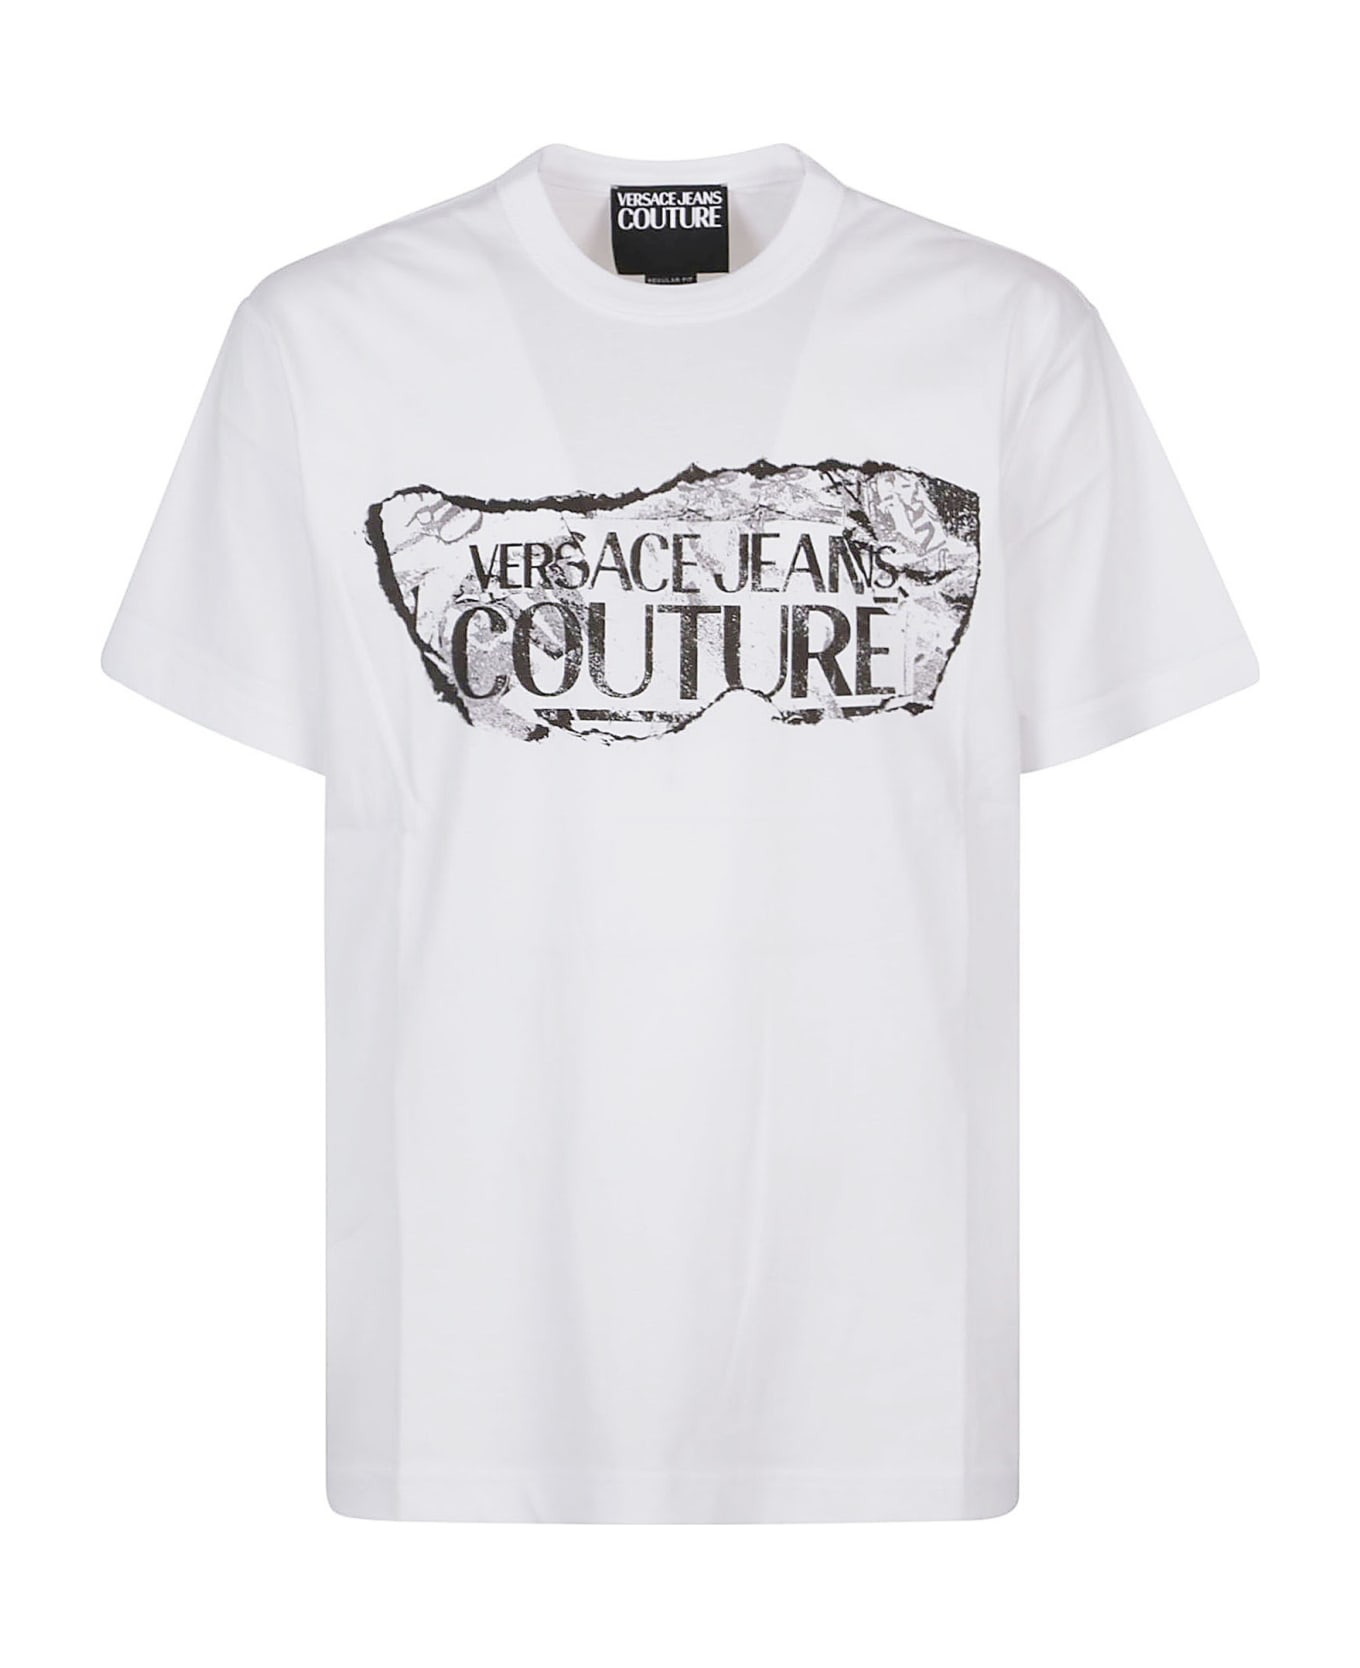 Versace Jeans Couture Magazine Logo T-shirt - White シャツ